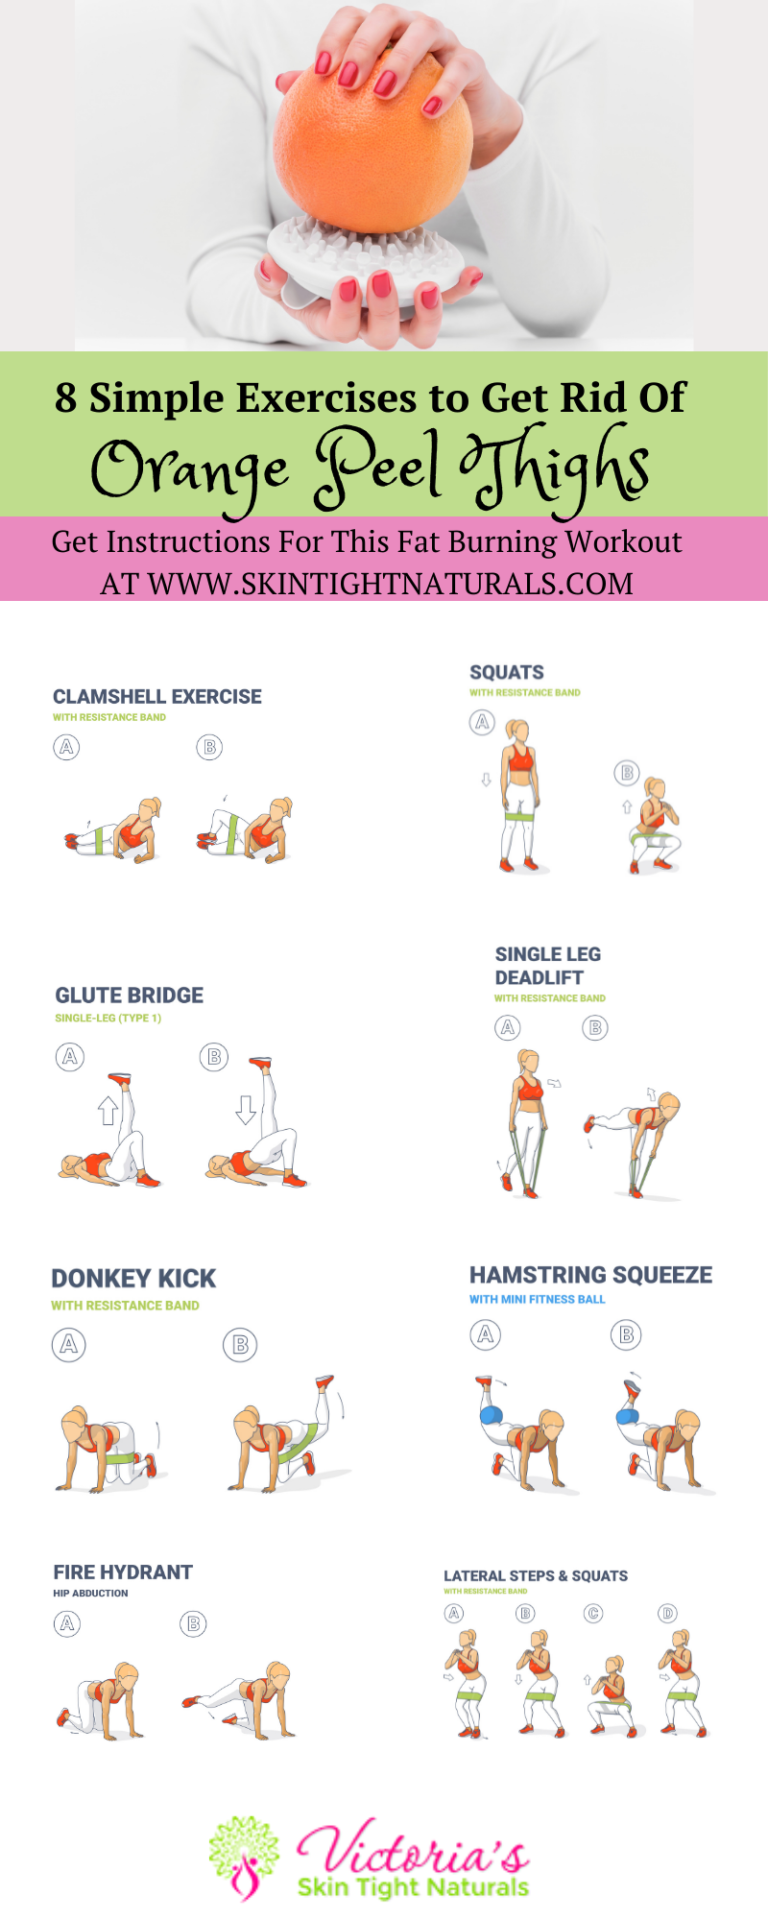 8 Simple Exercises To Get Rid Of Orange Peel Thighs Skin Tight Naturals